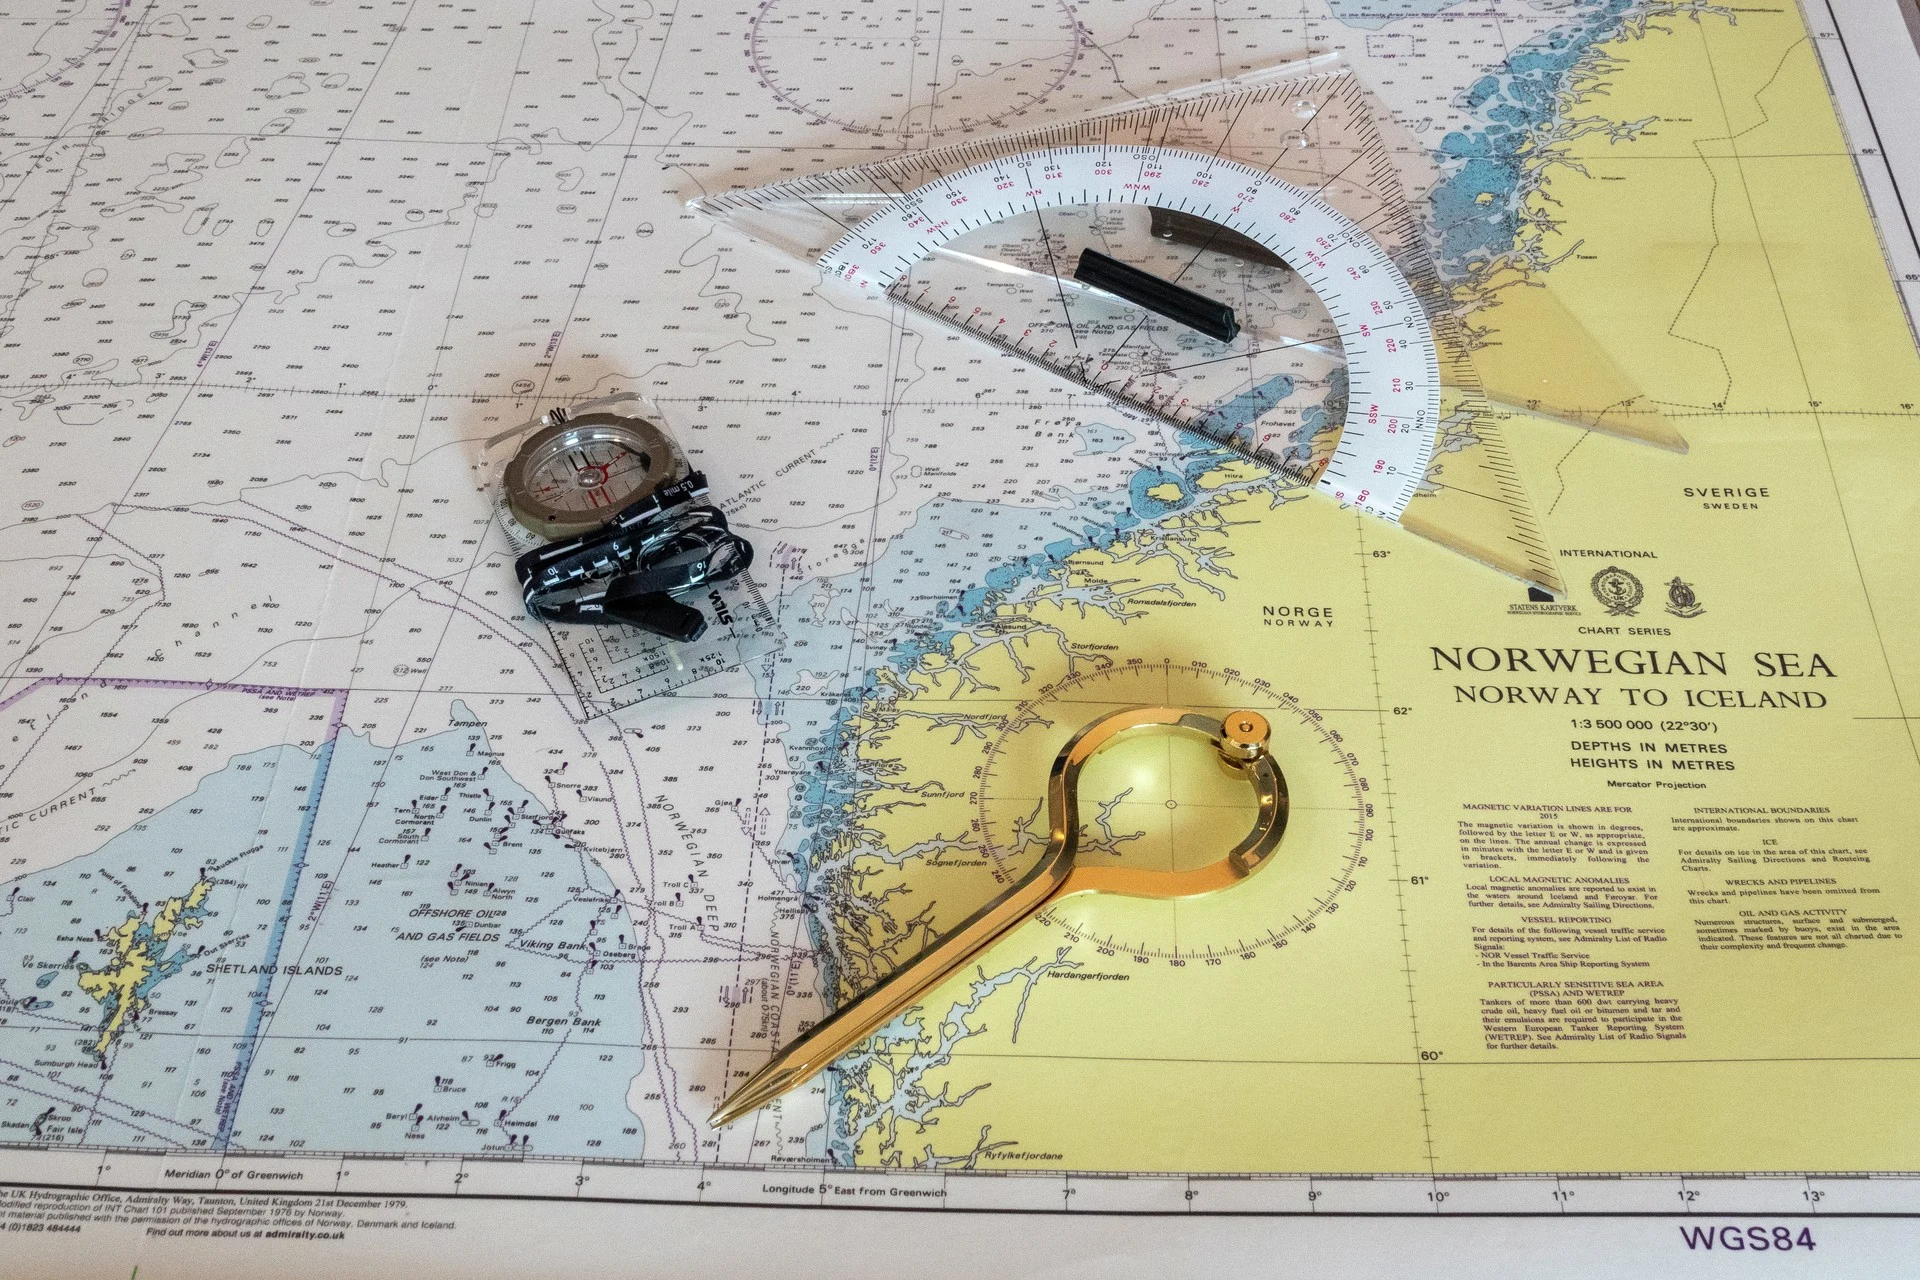 Oceanography and navigation on board